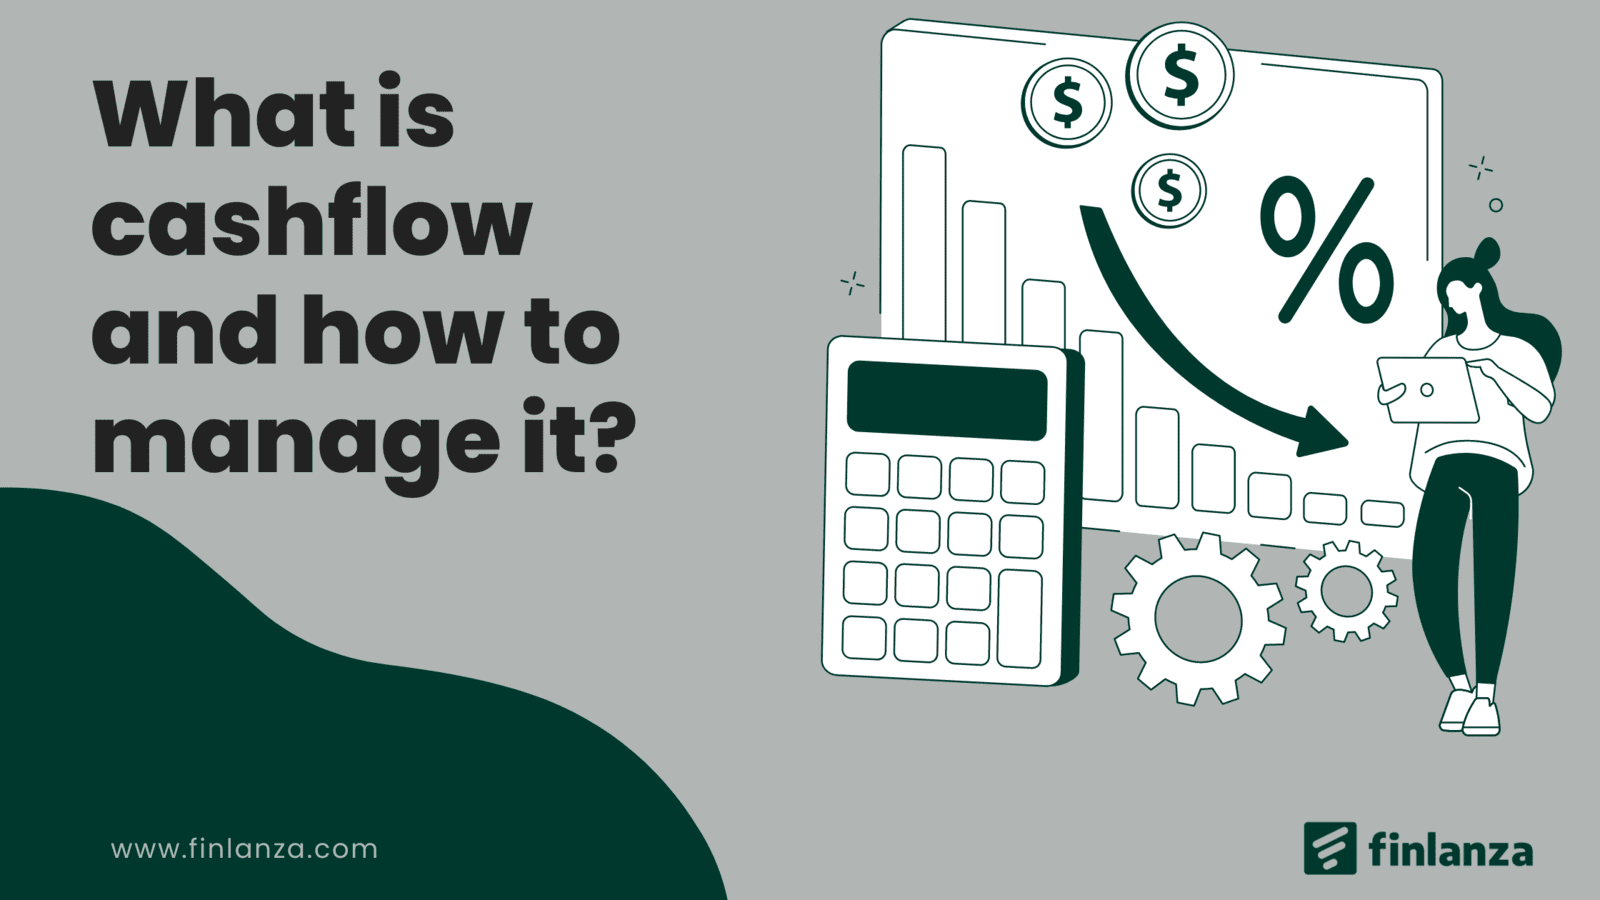 What is cashflow and how to manage it